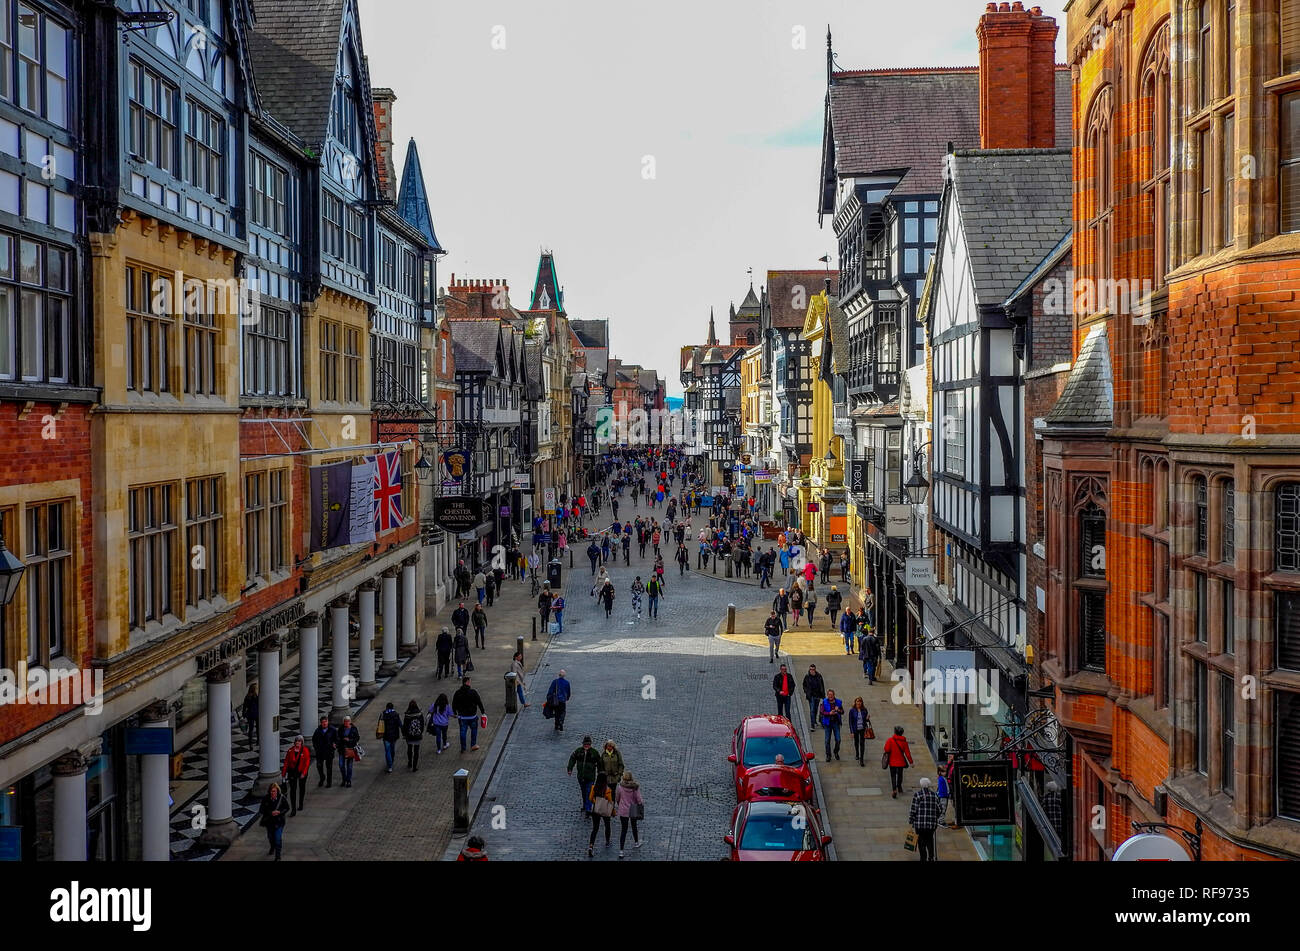 Oct 6, 2018 - Chestster UK:  Historic buildings on a narrow street with crowds of touritst shopping in this old and popular city. Stock Photo